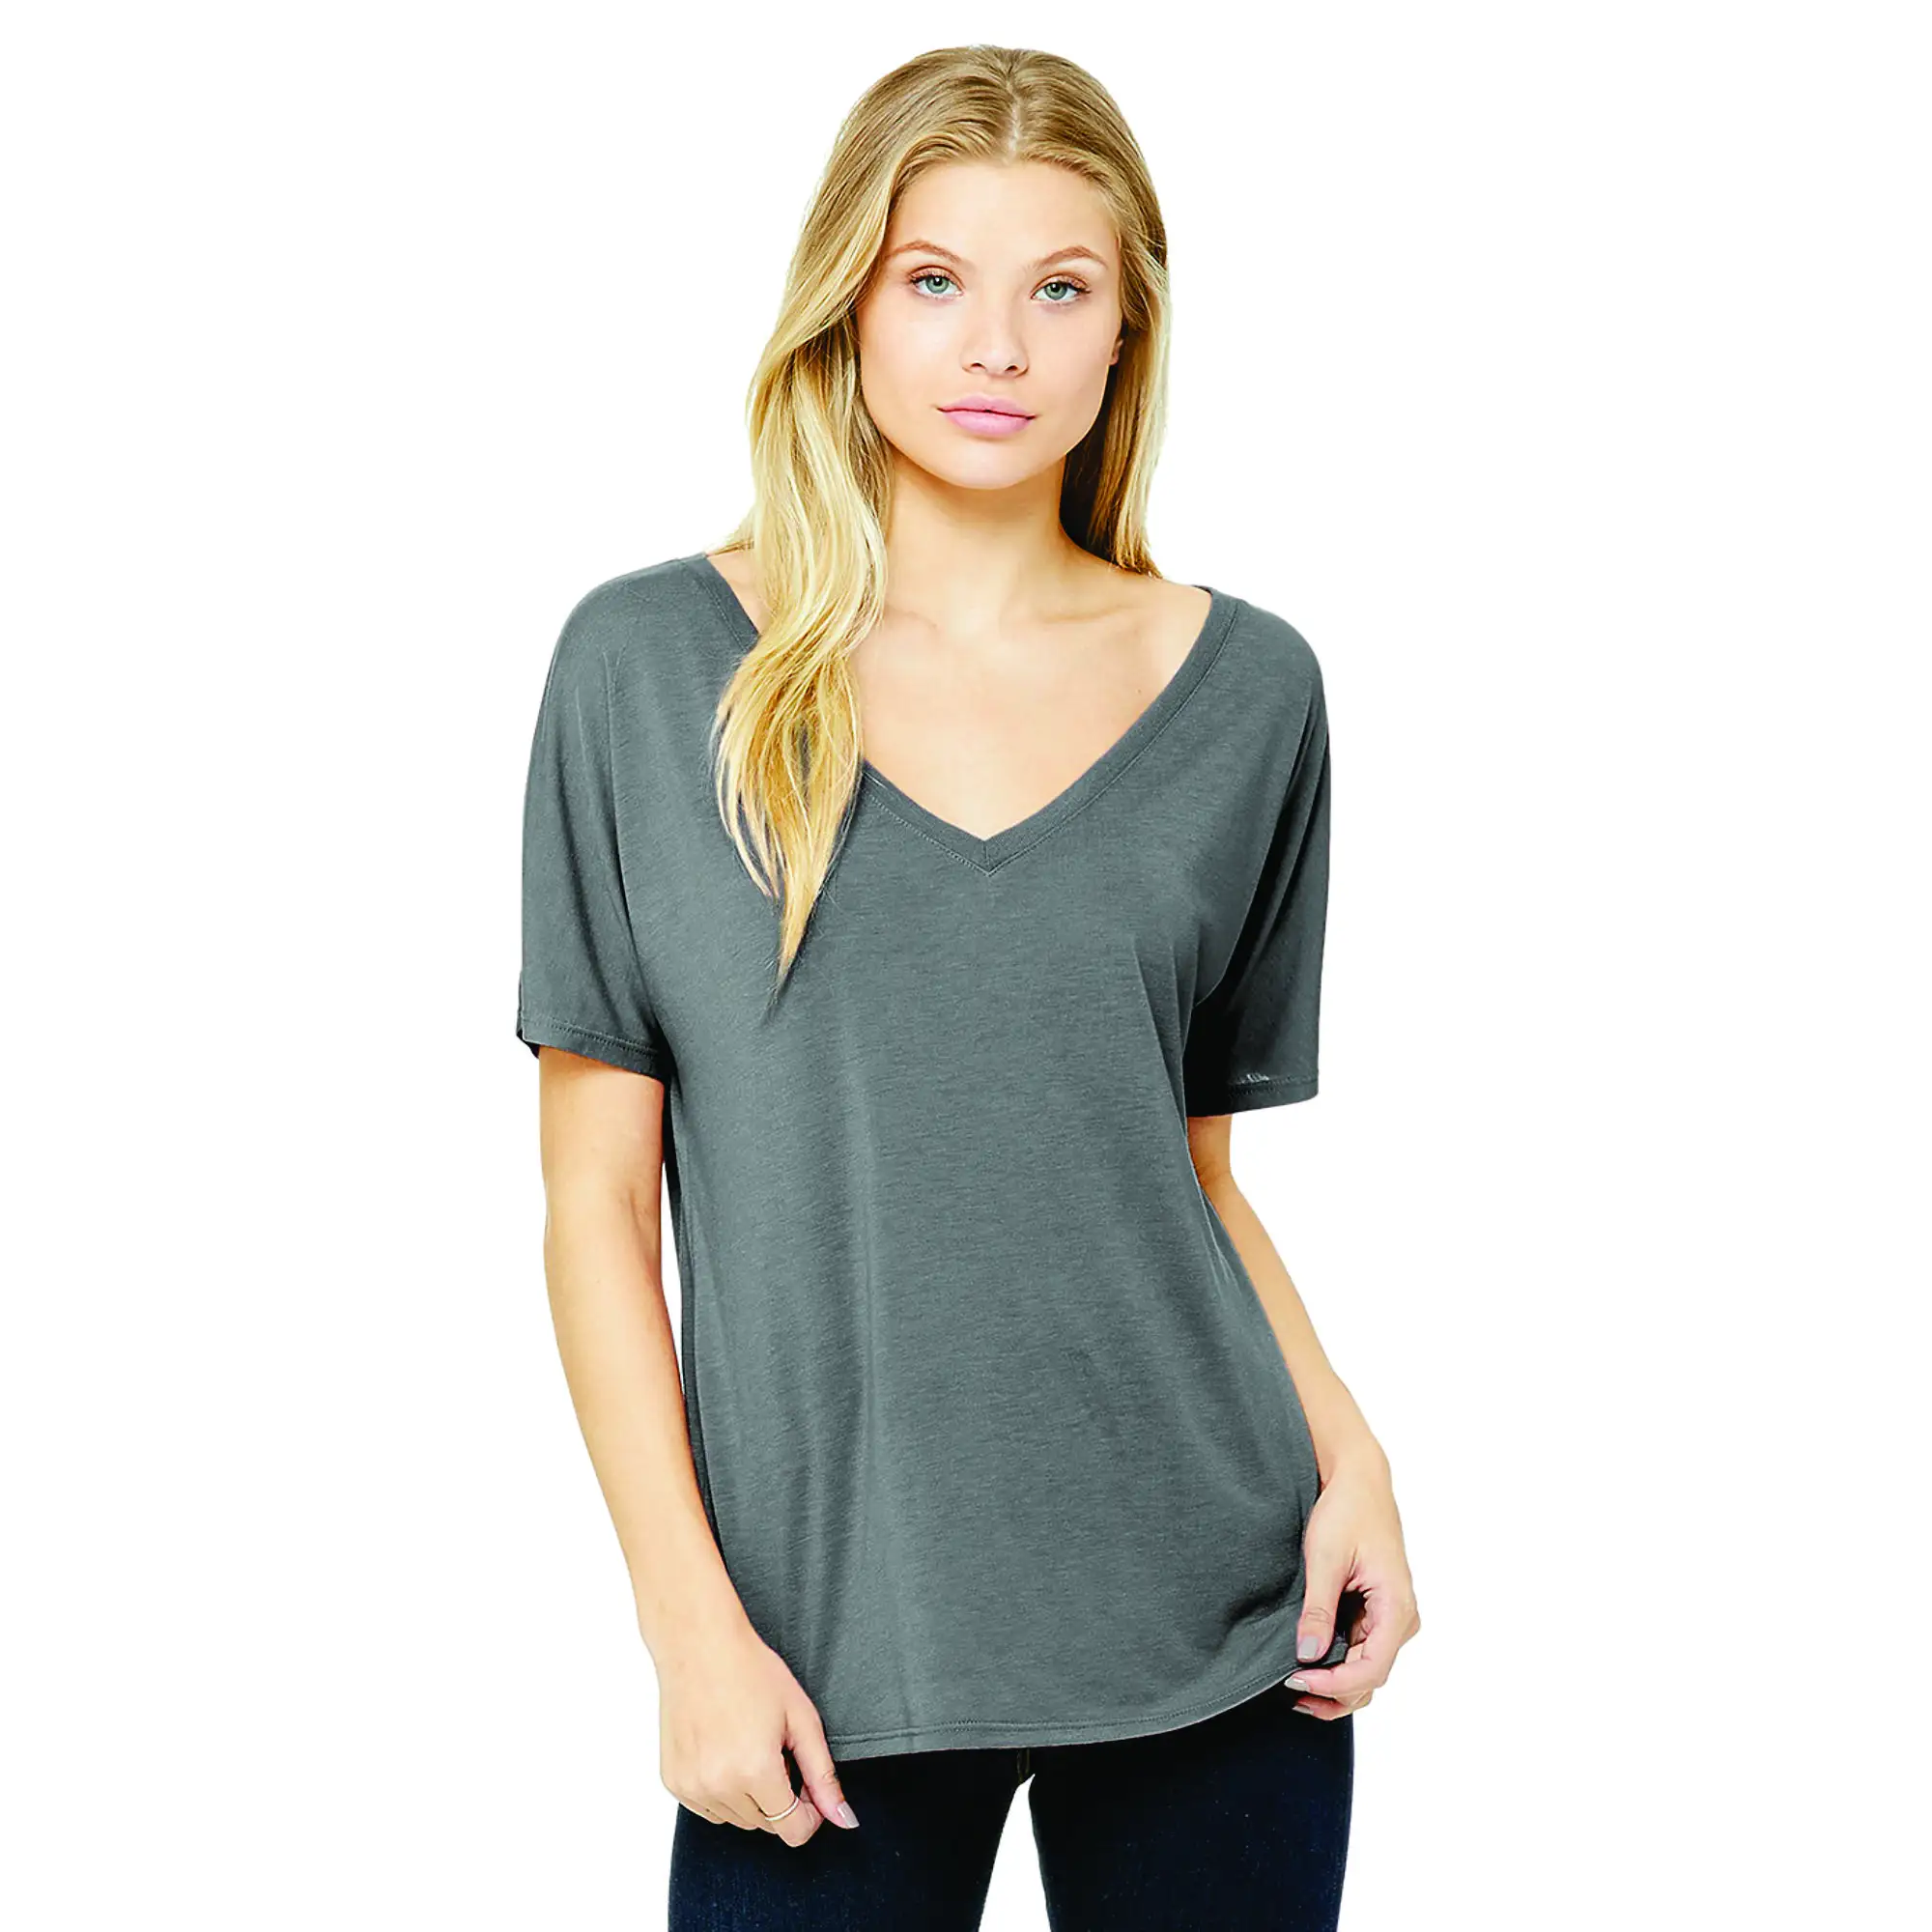 65% Poly 35% Viscose 32 Single 3.7 oz Grey Womens Slouchy V-Neck T-Shirt with Subtle Curved Bottom Cotton